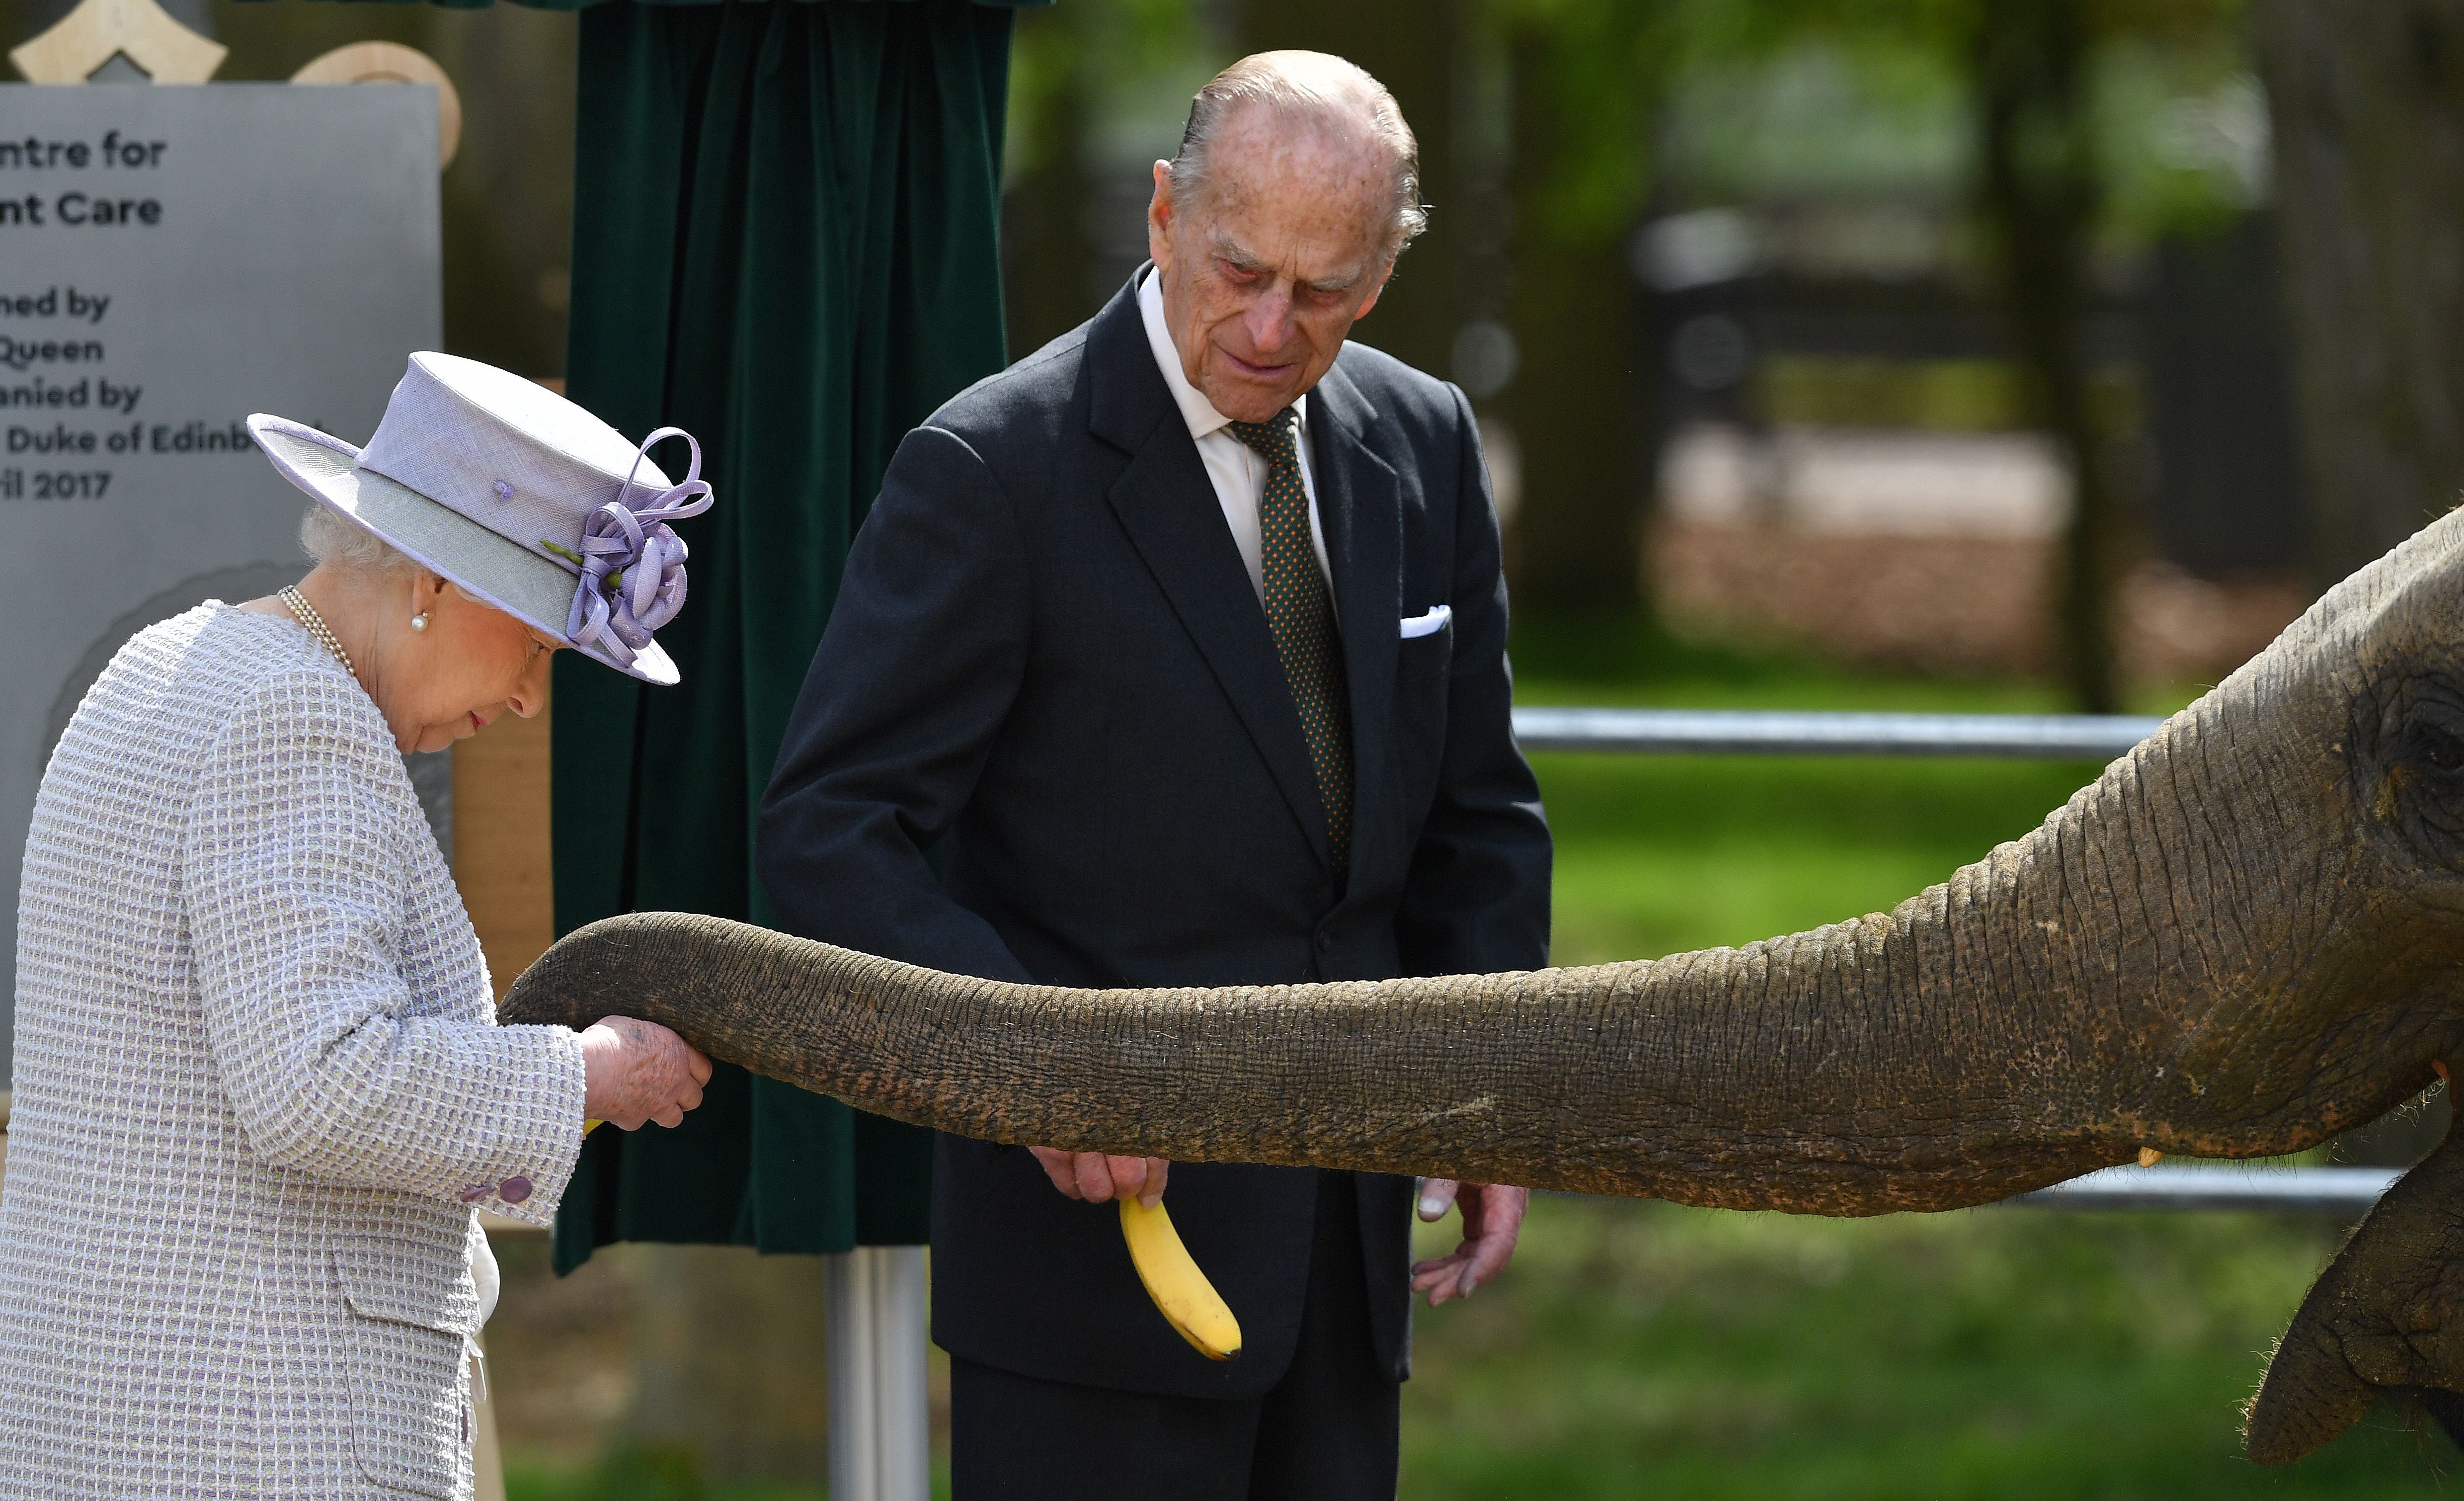 Prince Philip watches as his wife Queen Elizabeth II feed an elephant named ‘Donna’ after opening the new Centre for Elephant Care at ZSL Whipsnade Zoo in 2017